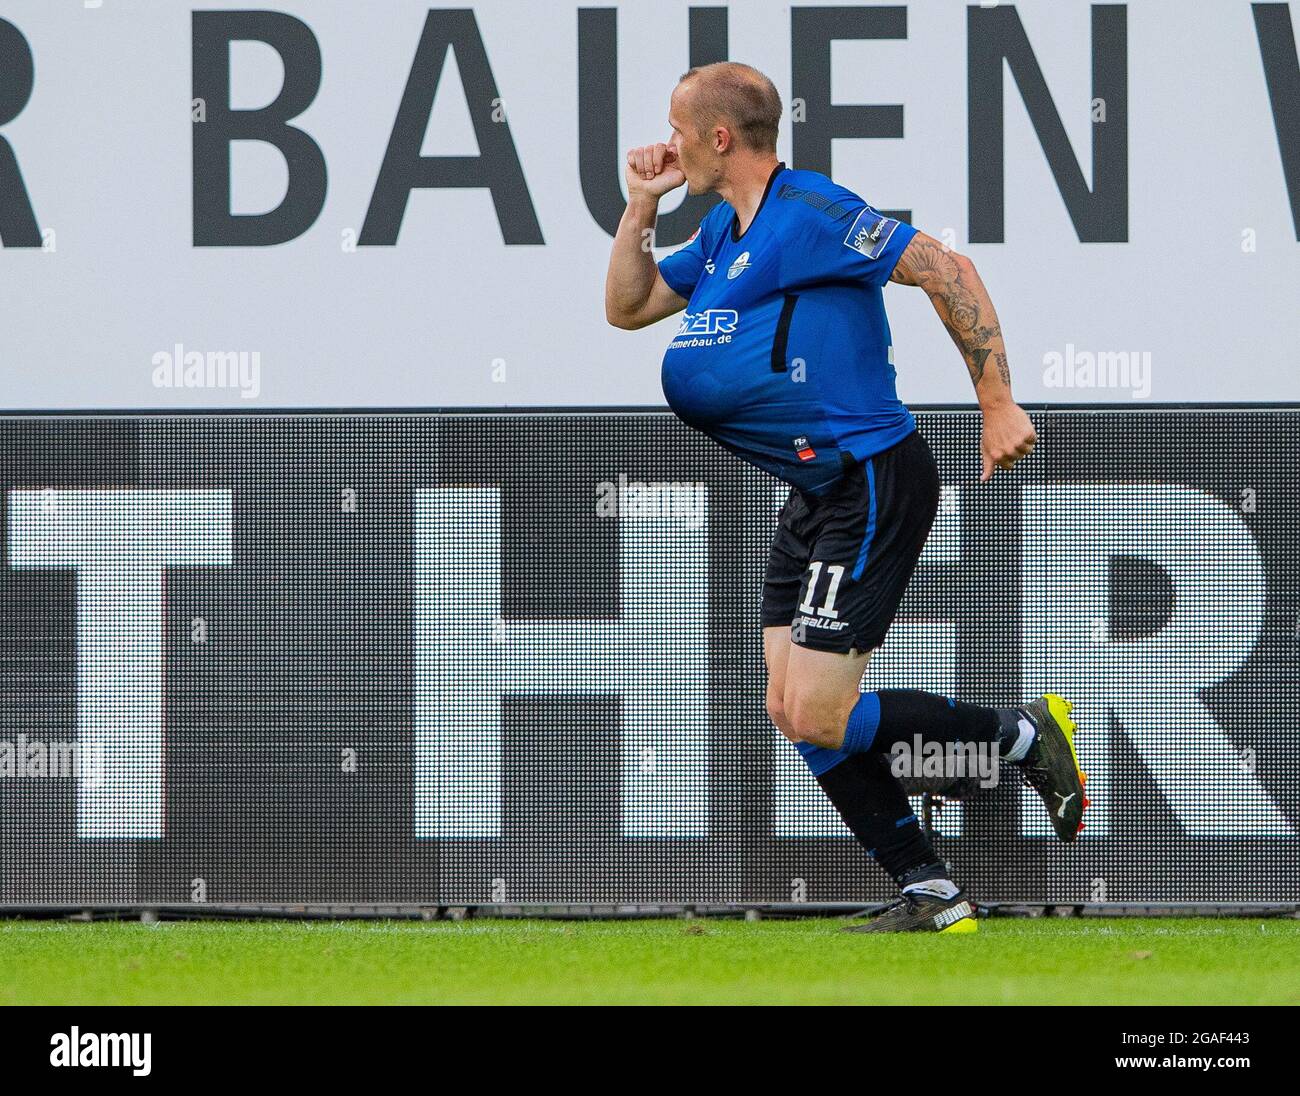 Paderborn, Germany. 30th July, 2021. Soccer: 2nd Bundesliga, SC Paderborn  07 - 1. FC Nürnberg, Matchday 2. Paderborn's Sven Michel celebrates the  goal with the ball under his jersey to make it